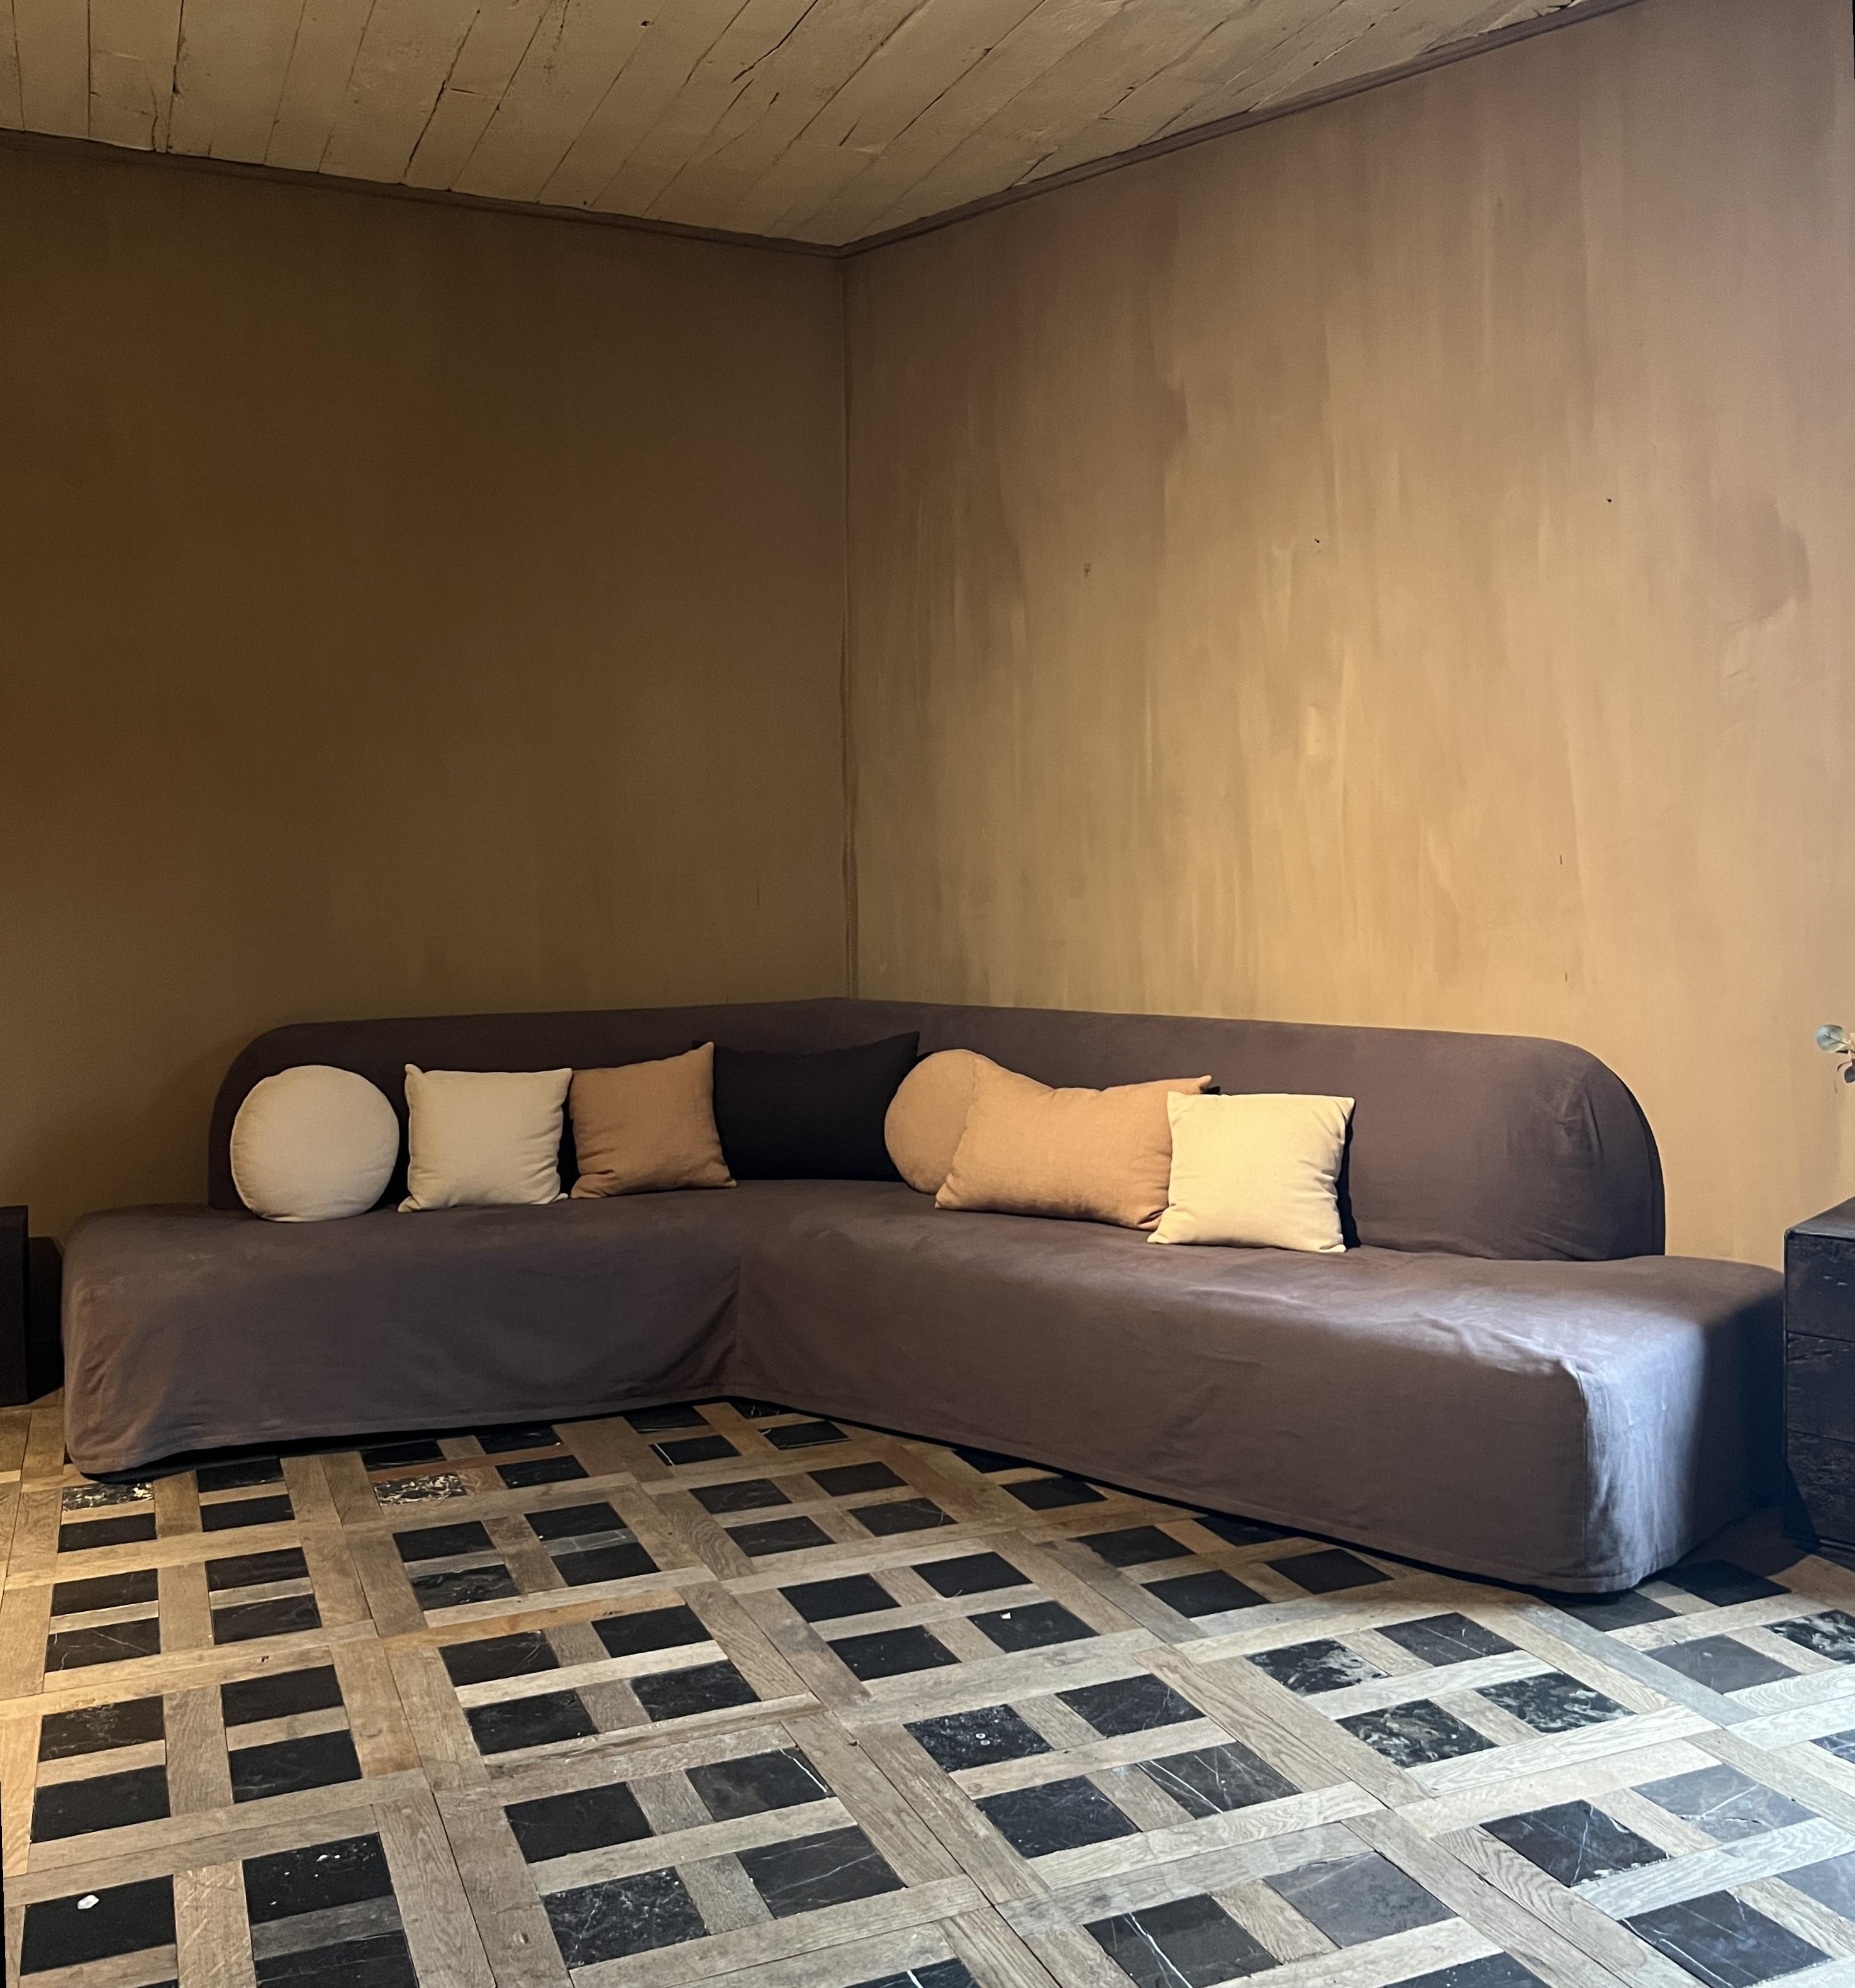 Our sofa TRISTAN can be custom made in any desired dimensions. It comes standard with a linnen slipcover and 6 cushions. All colors can be chosen from our samplebook. The listed price is for a straight sofa (not a corner model) 240 cm x 100 cm d x